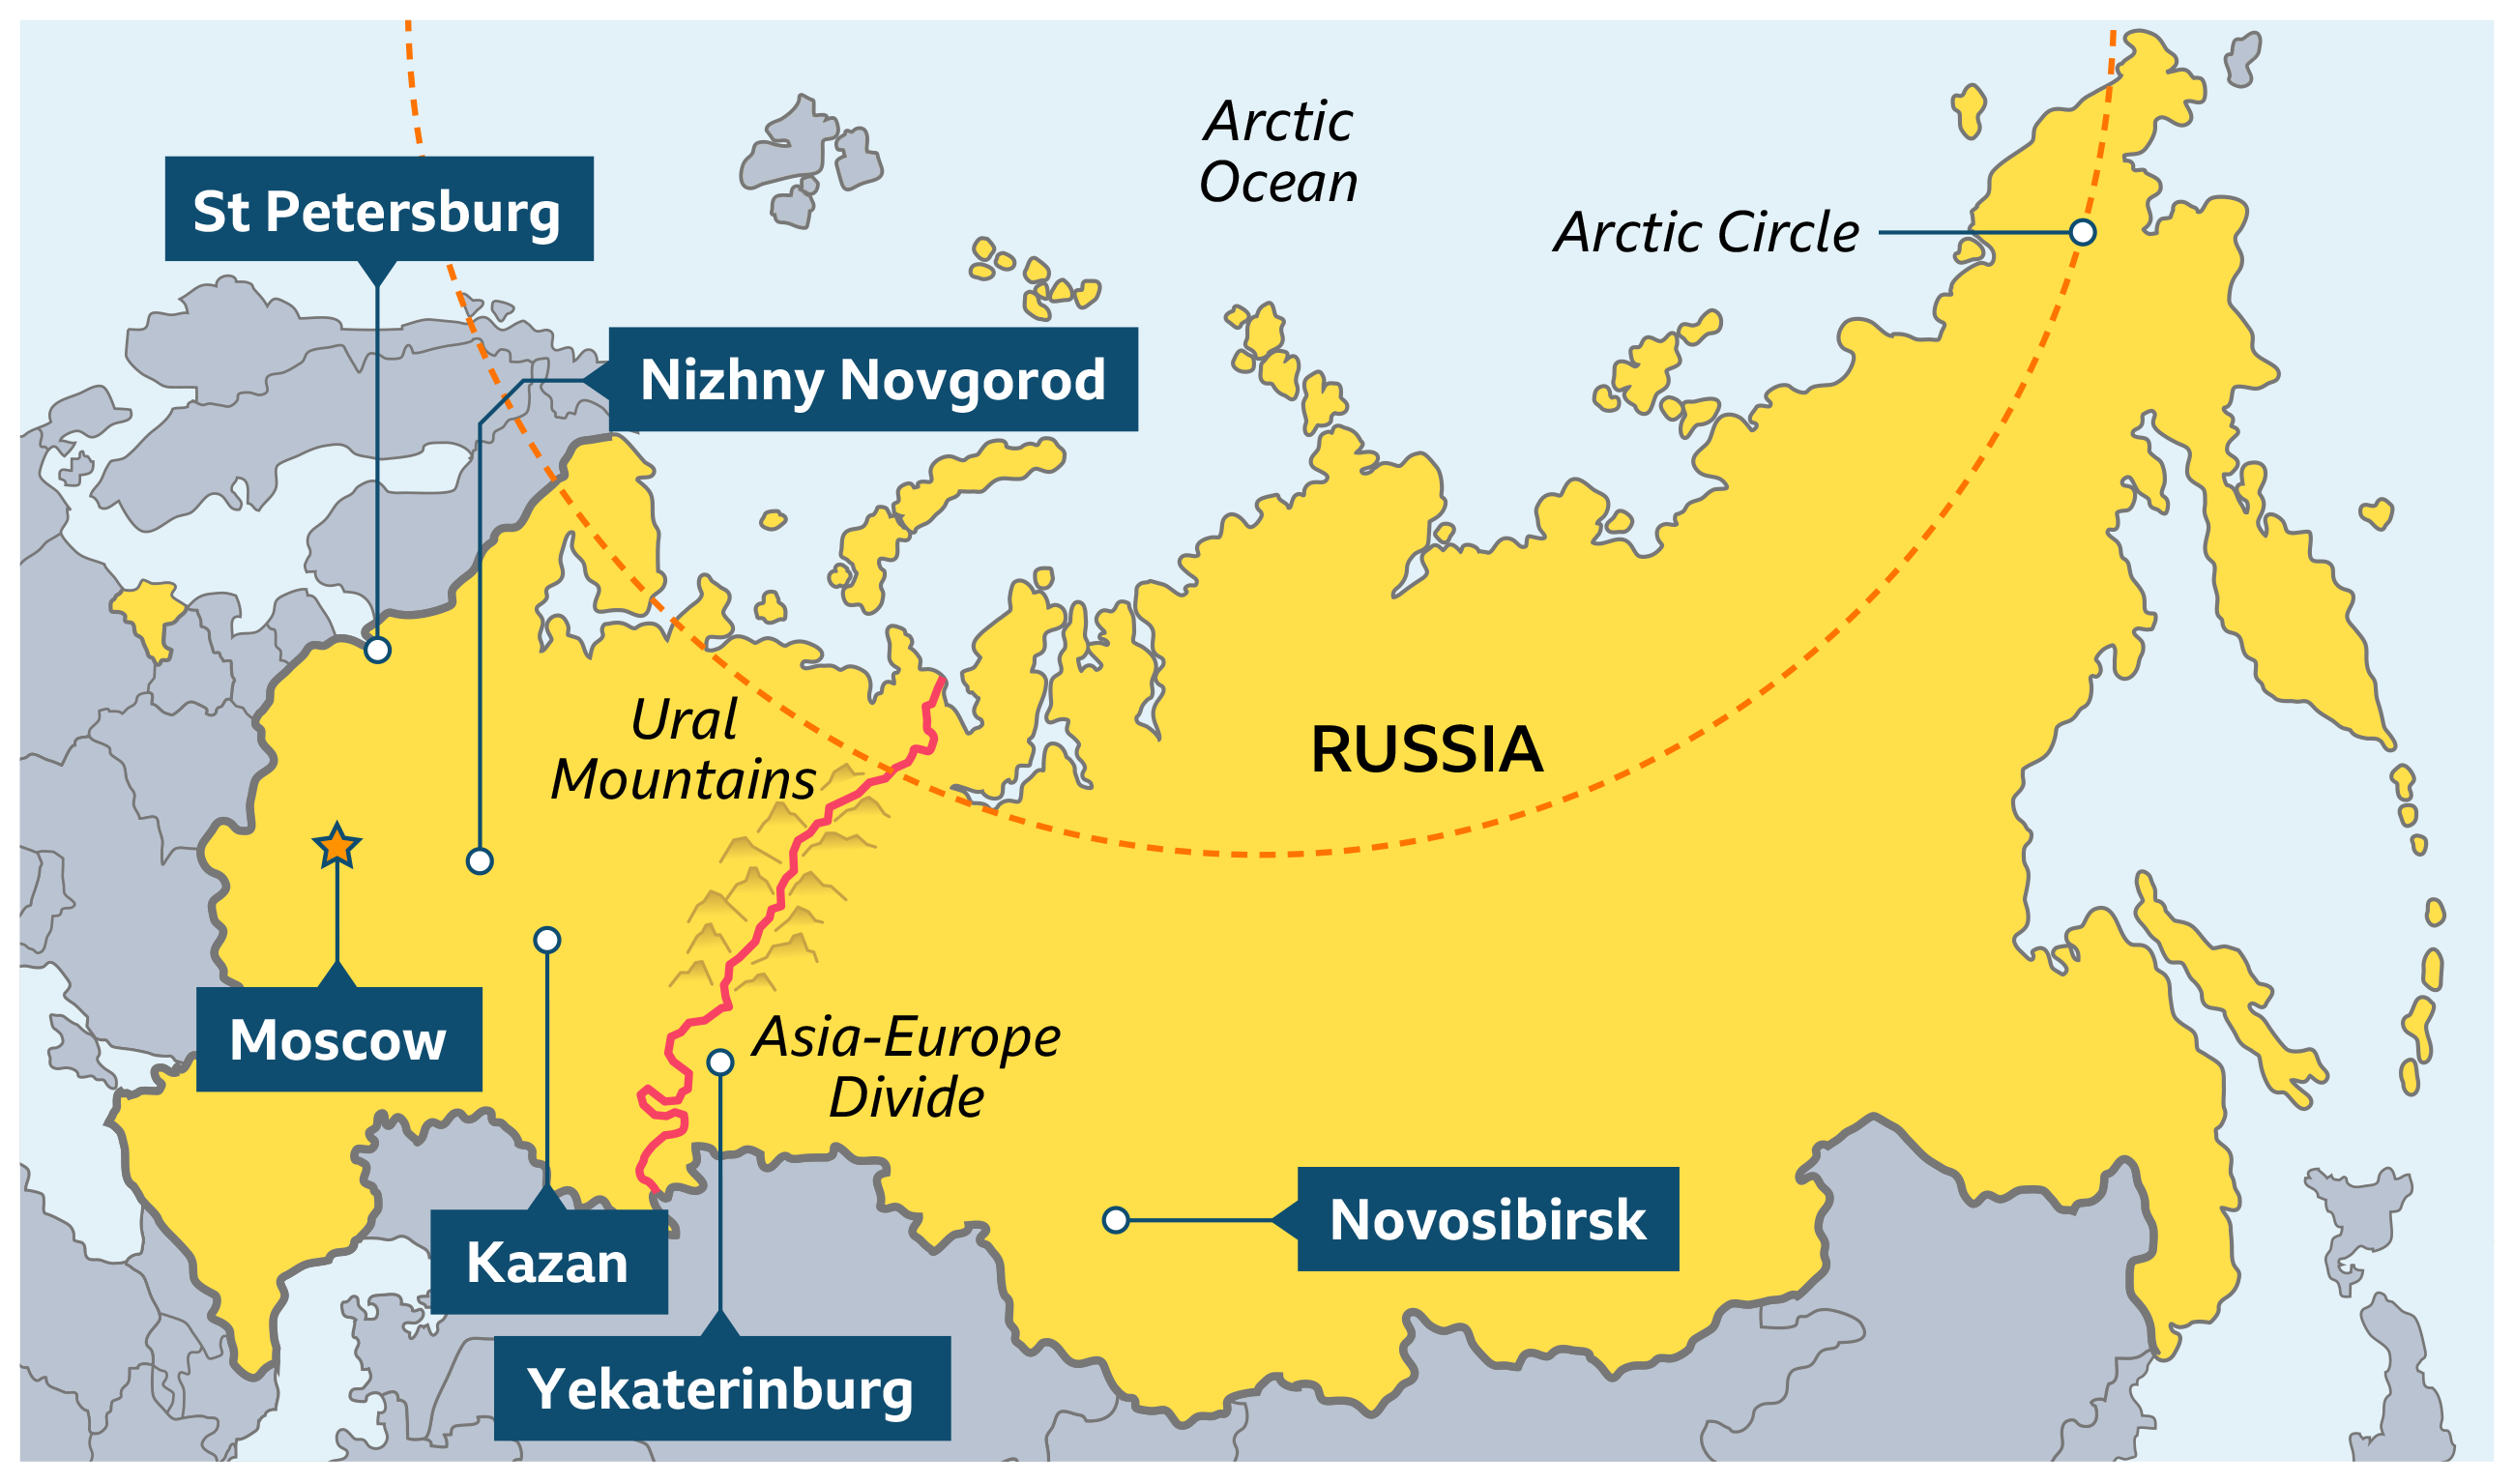 Map of Russia showing the Asia-Europe divide, the Ural Mountains, and the Arctic circle. Cities like Moscow, the capital, Nizhny Novgorod, Yekaterinburg, St Petersburg, Kazan and Novosibirsk are shown